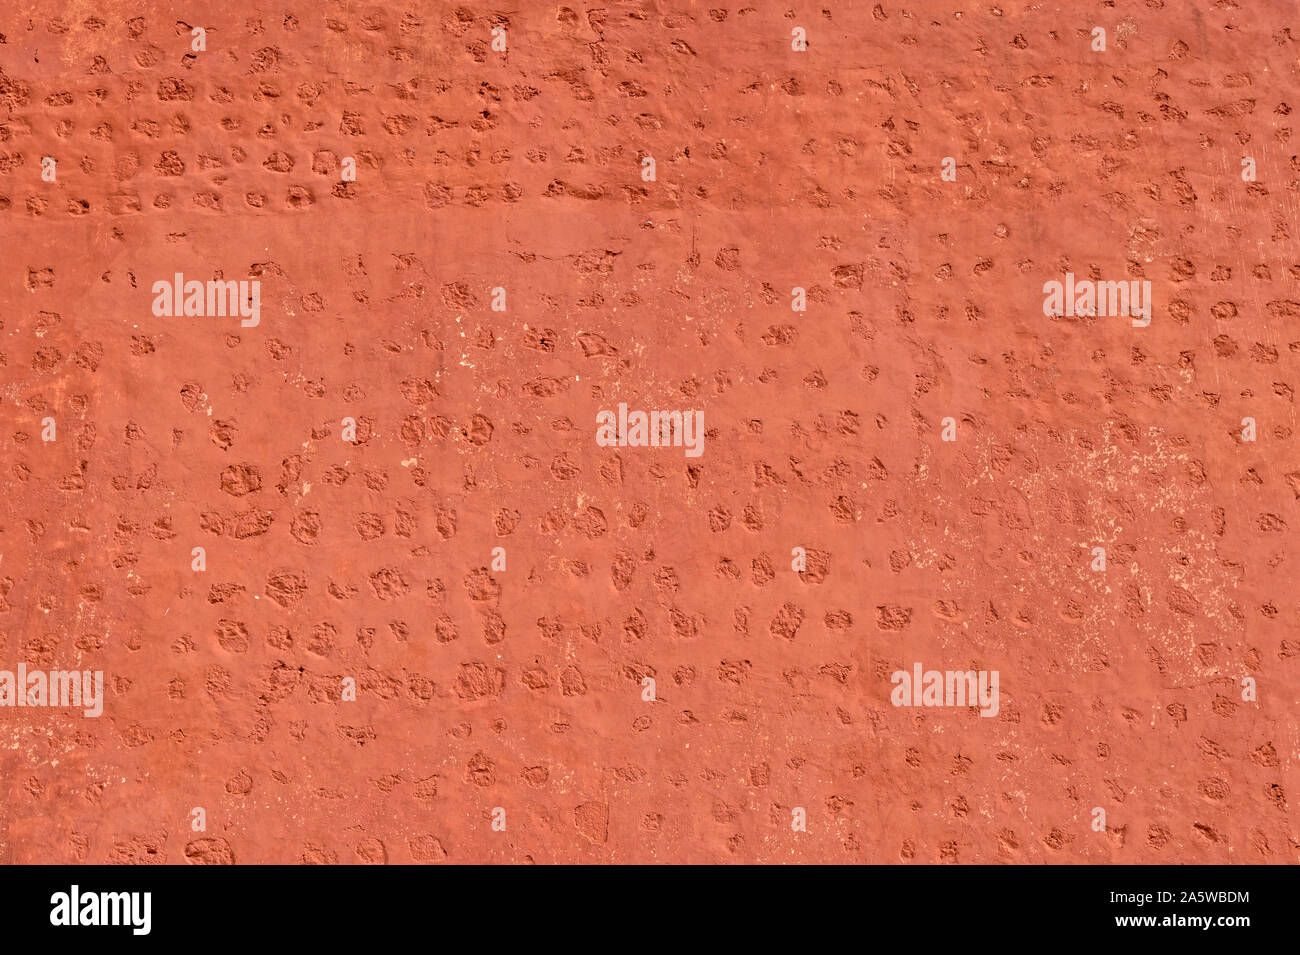 Architectural wall texture detail Stock Photo